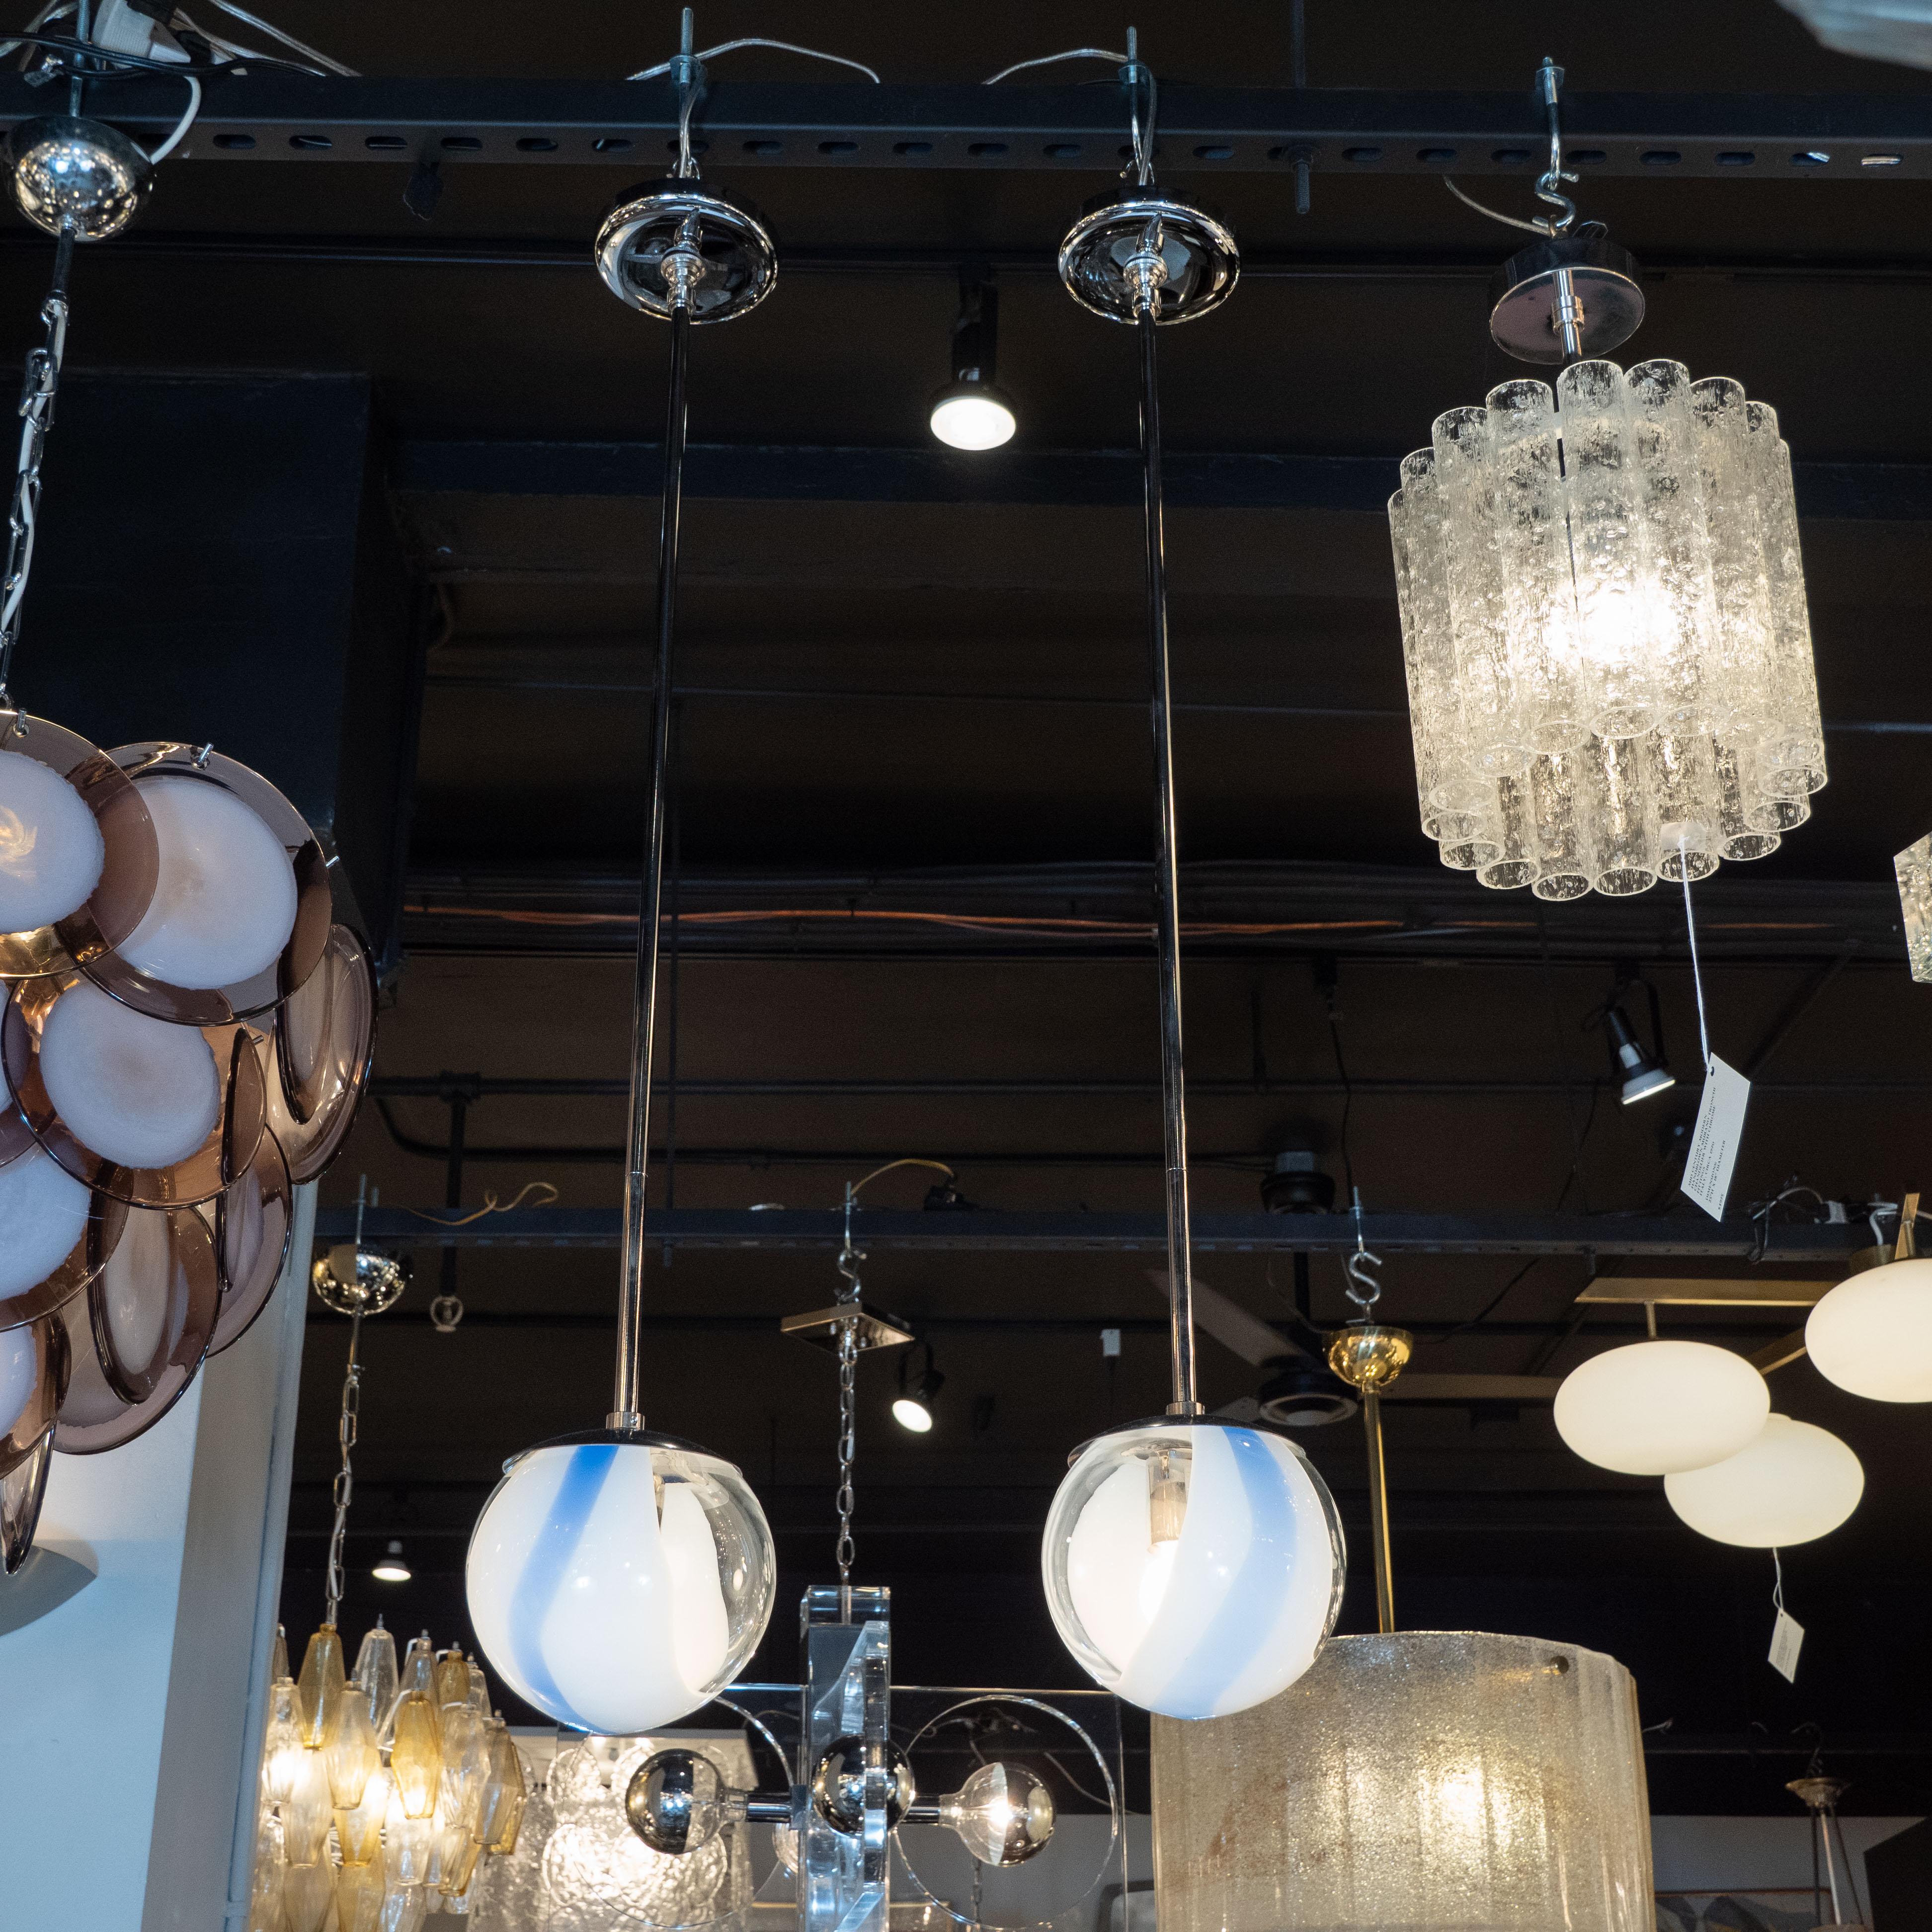 This stunning pair of modernist pendants were hand blown in Murano, Italy- the island off the coast of Venice renowned for centuries for its superlative glass production. They feature spherical forms realized in translucent glass with opaque white